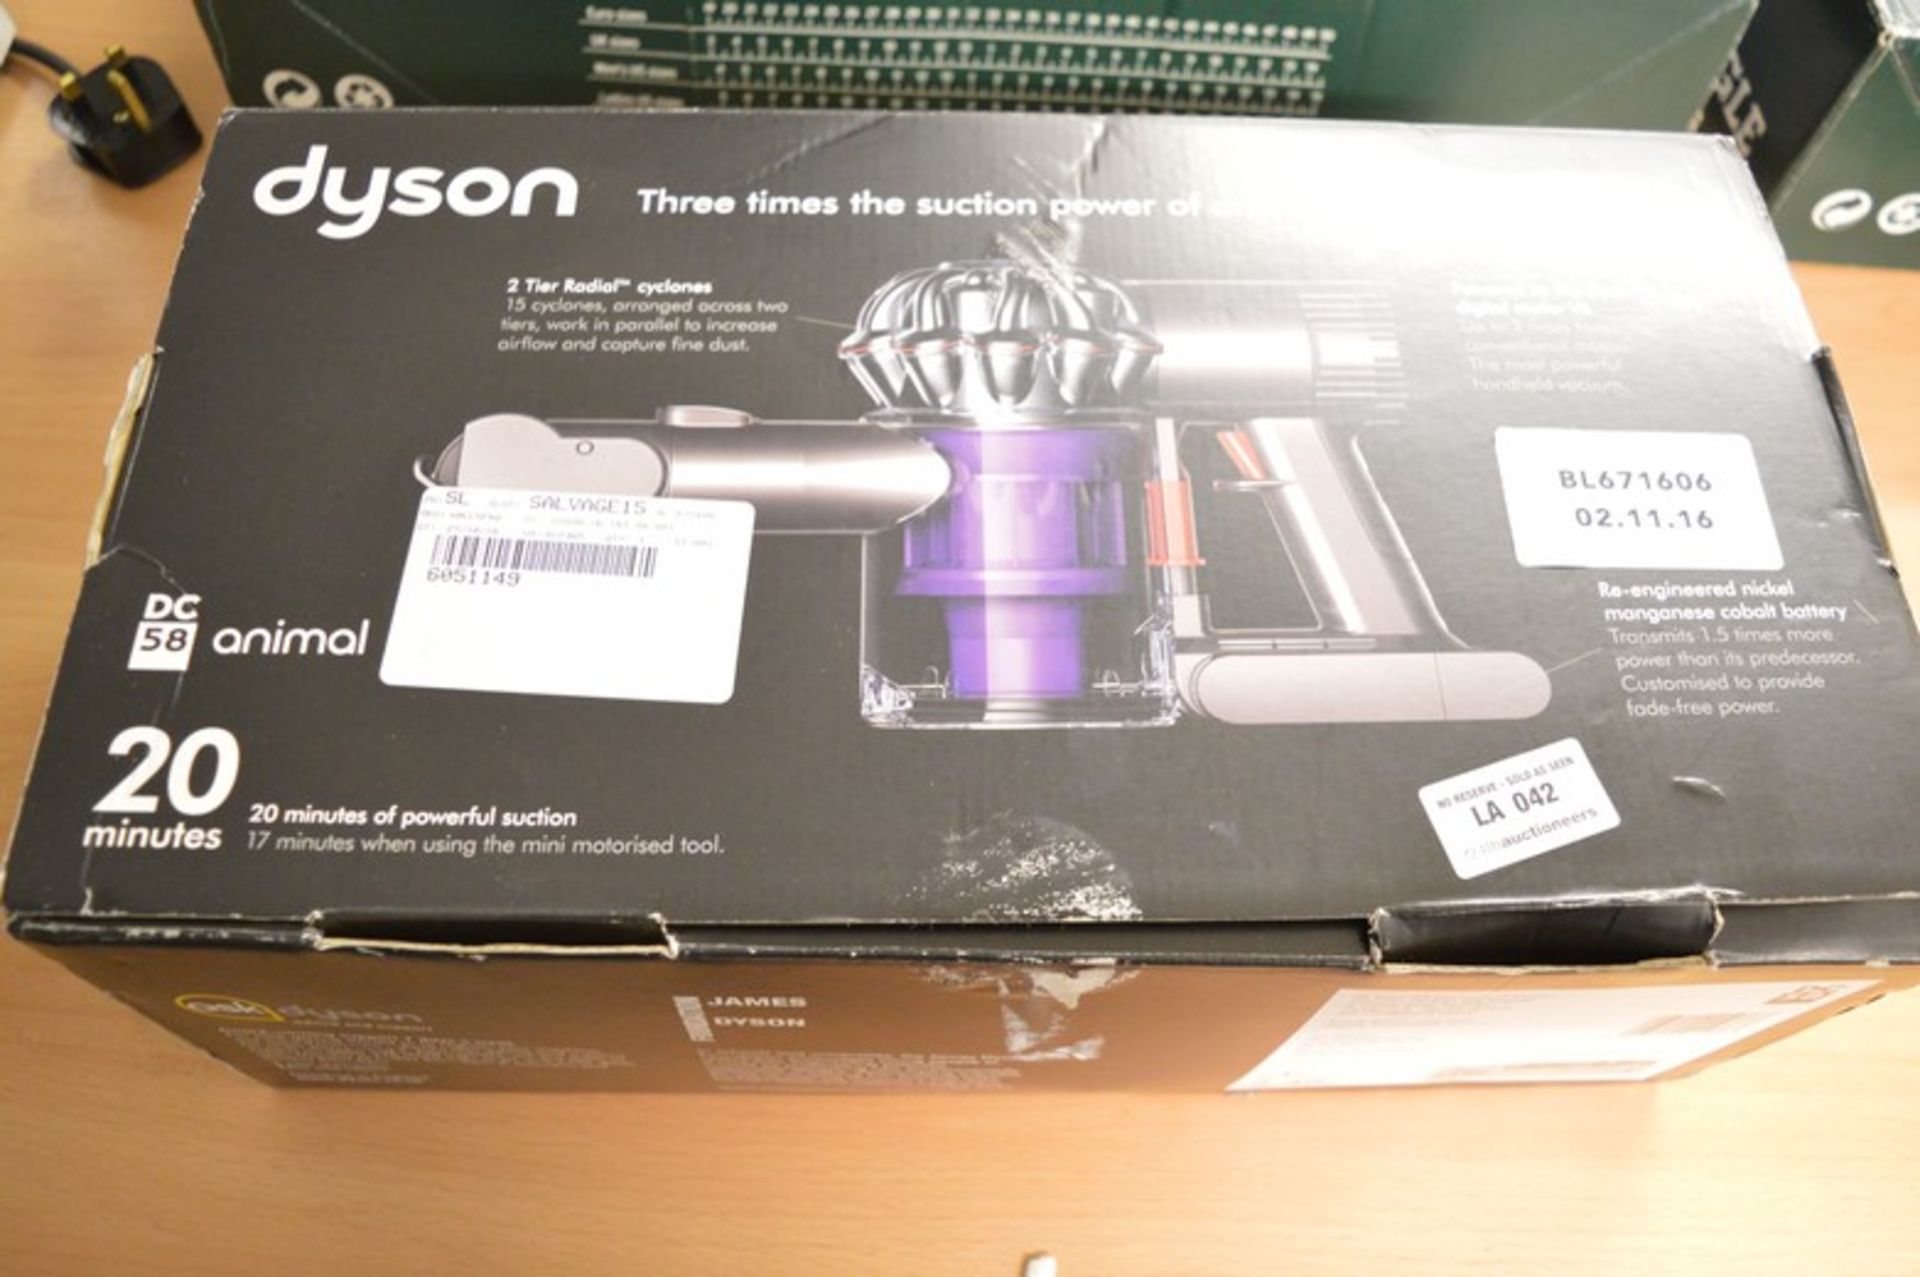 1 x BOXED DYSON DC58 ANIMAL CORDLESS VACUUM CLEANER RRP £180 02.11.16 *PLEASE NOTE THAT THE BID